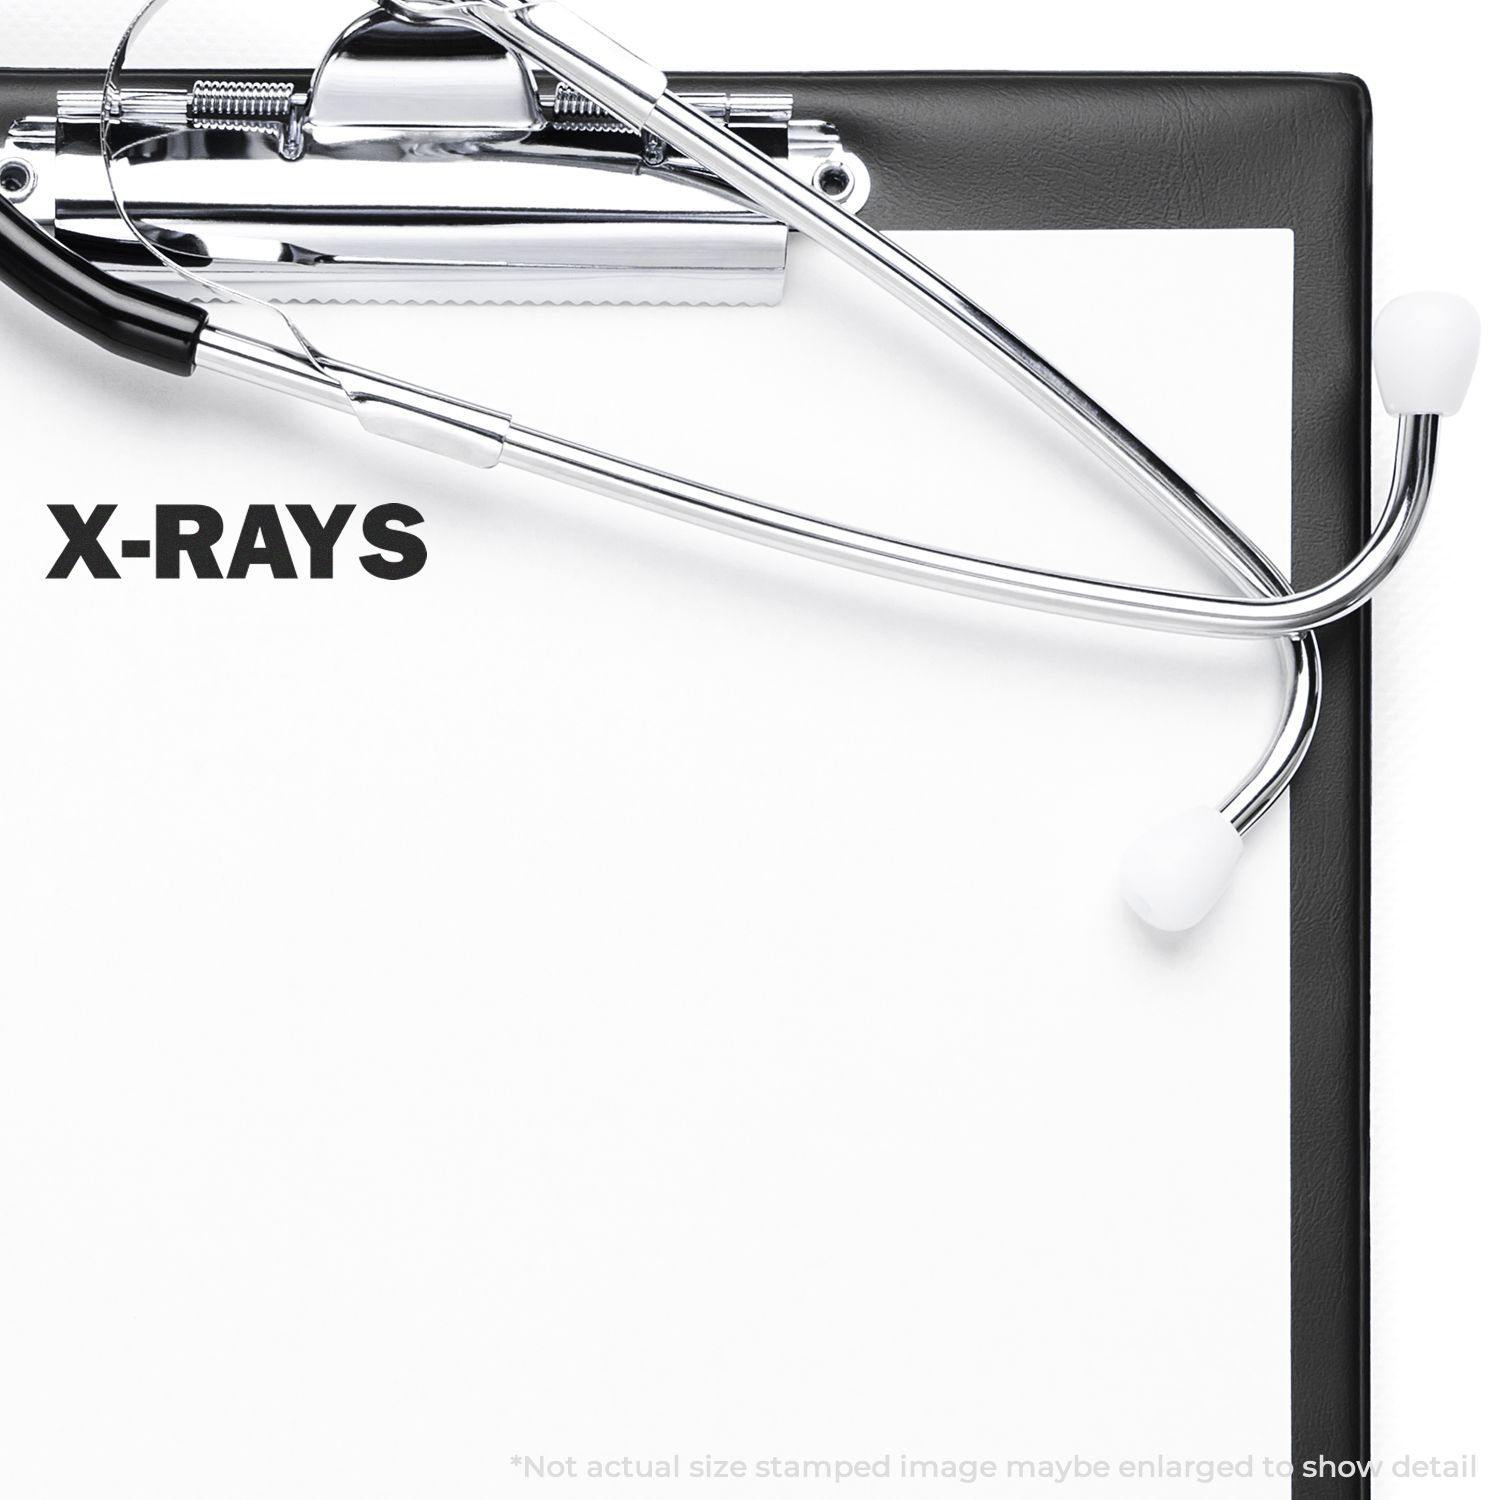 A stock office rubber stamp with a stamped image showing how the text "X-RAYS" in a large font is displayed after stamping.